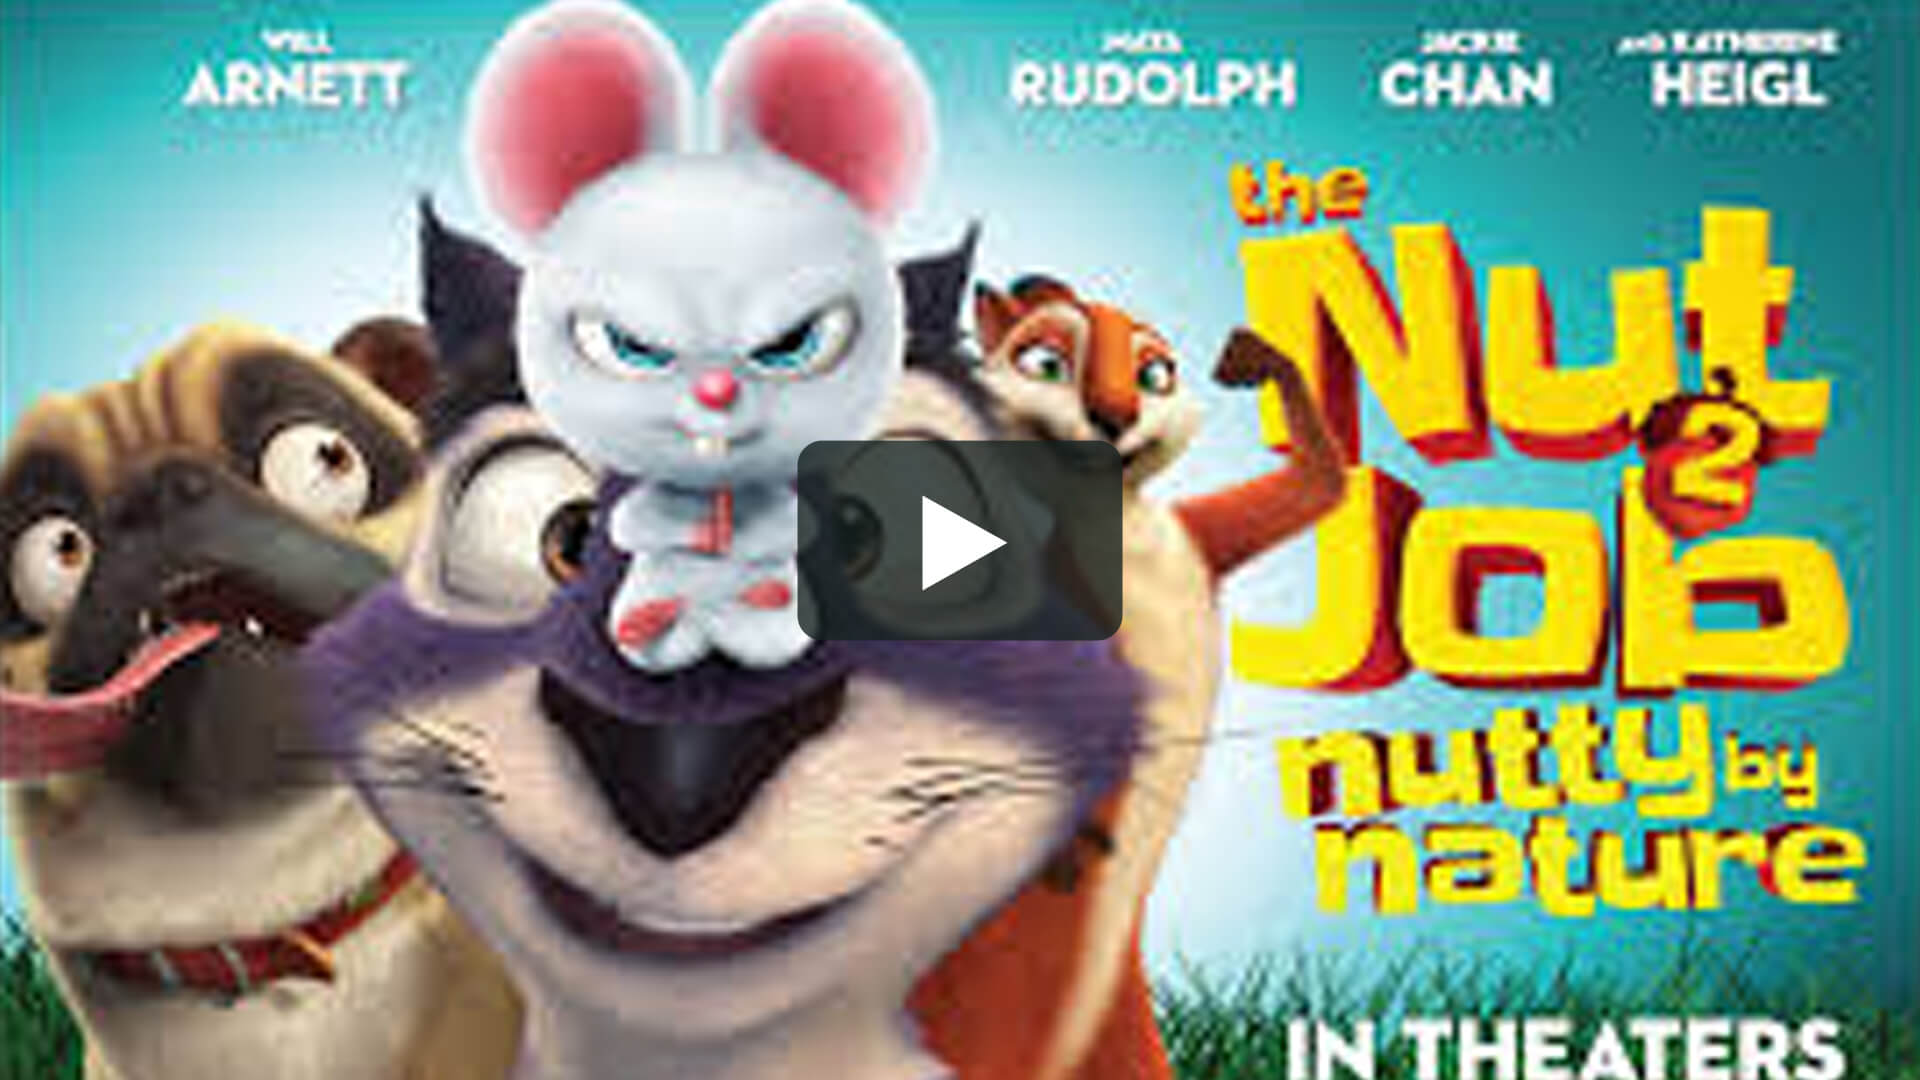 The Nut Job 2: Nutty by Nature - 搶劫堅果店2